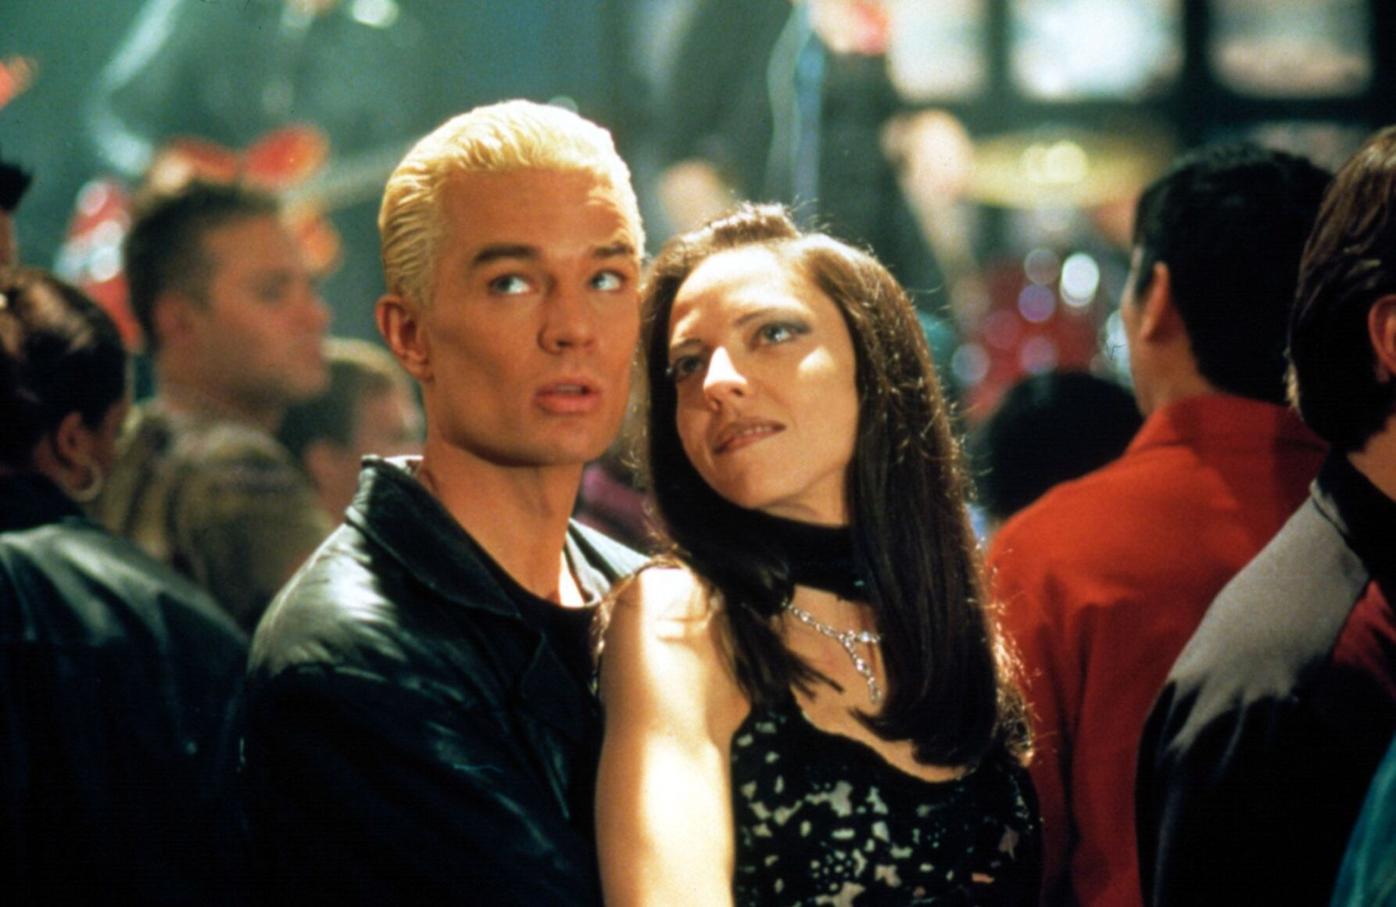 The Buffy Episode That Nearly Broke James Marsters